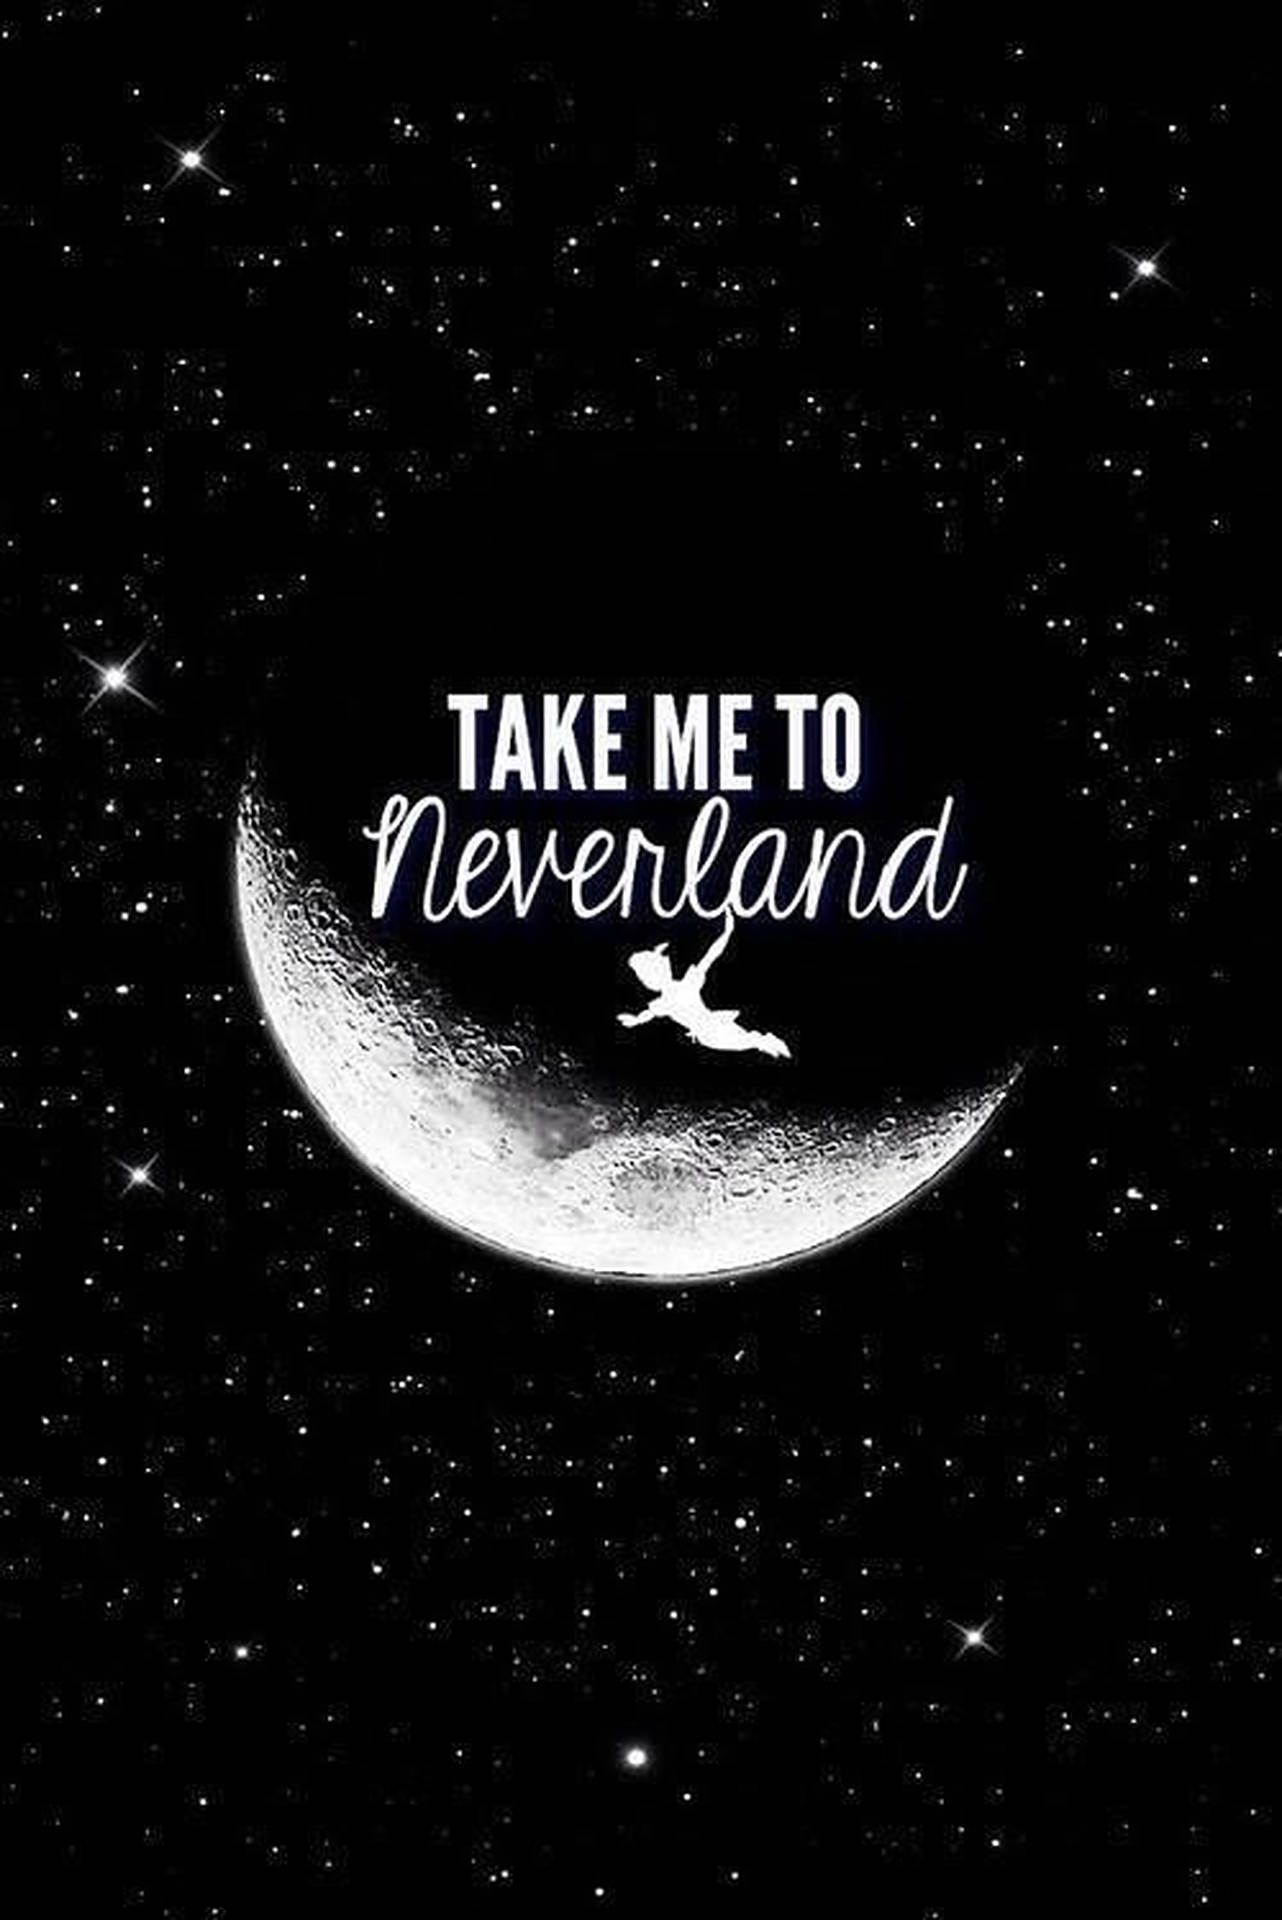 Peterpan Ta Mig Till Neverland (as A Suggestion For Potential Wallpaper Design) Wallpaper